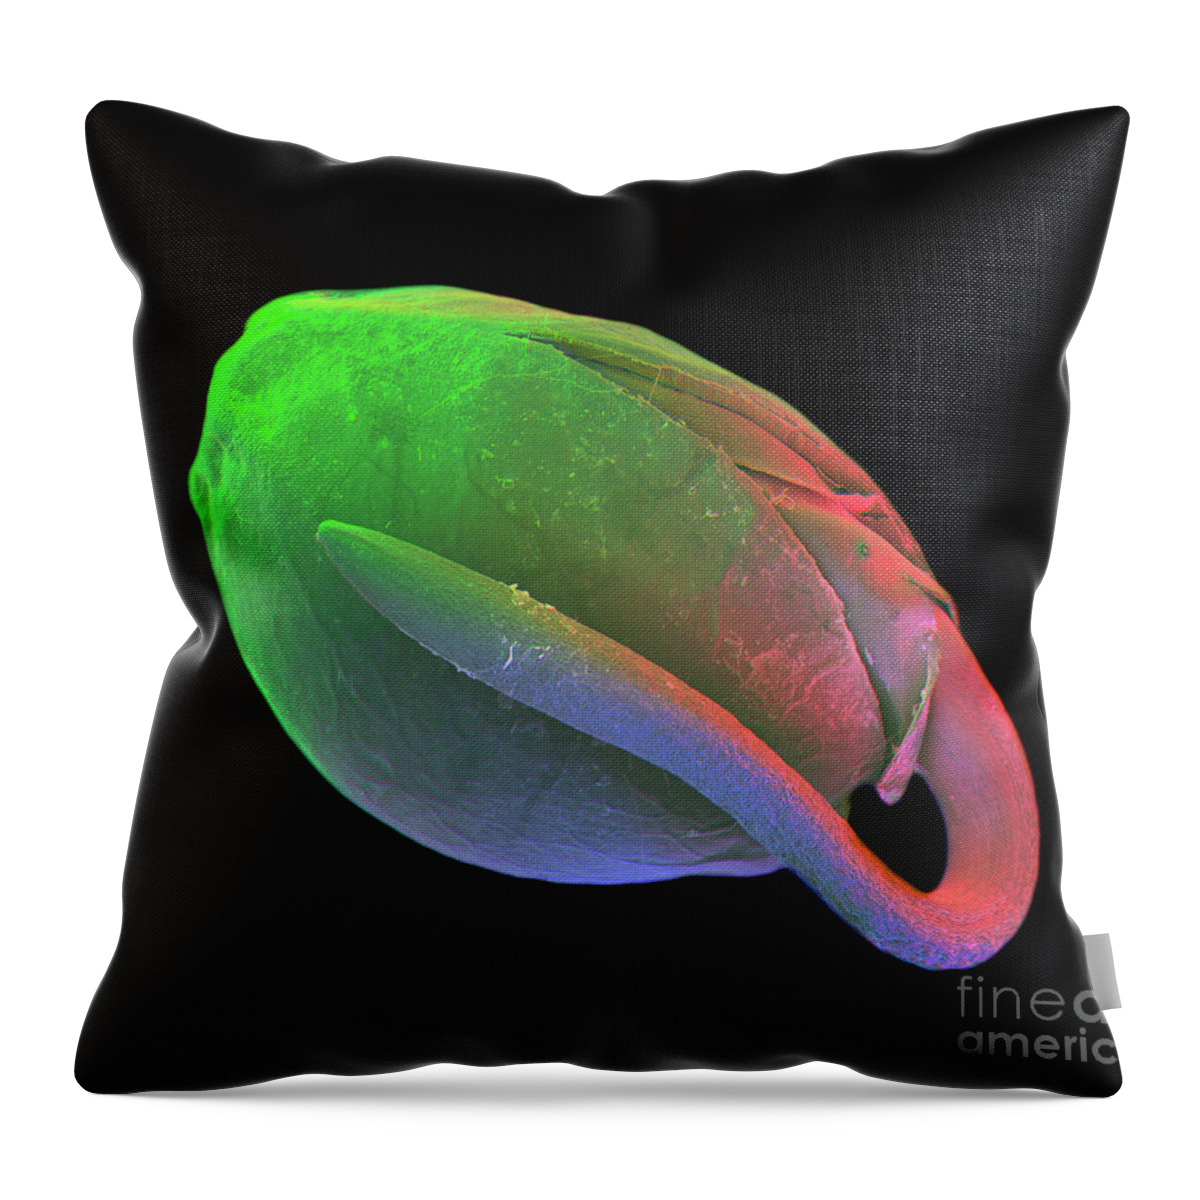 Epromo04172018a Throw Pillow featuring the photograph Germinating Marijuana Seed #2 by Ted Kinsman